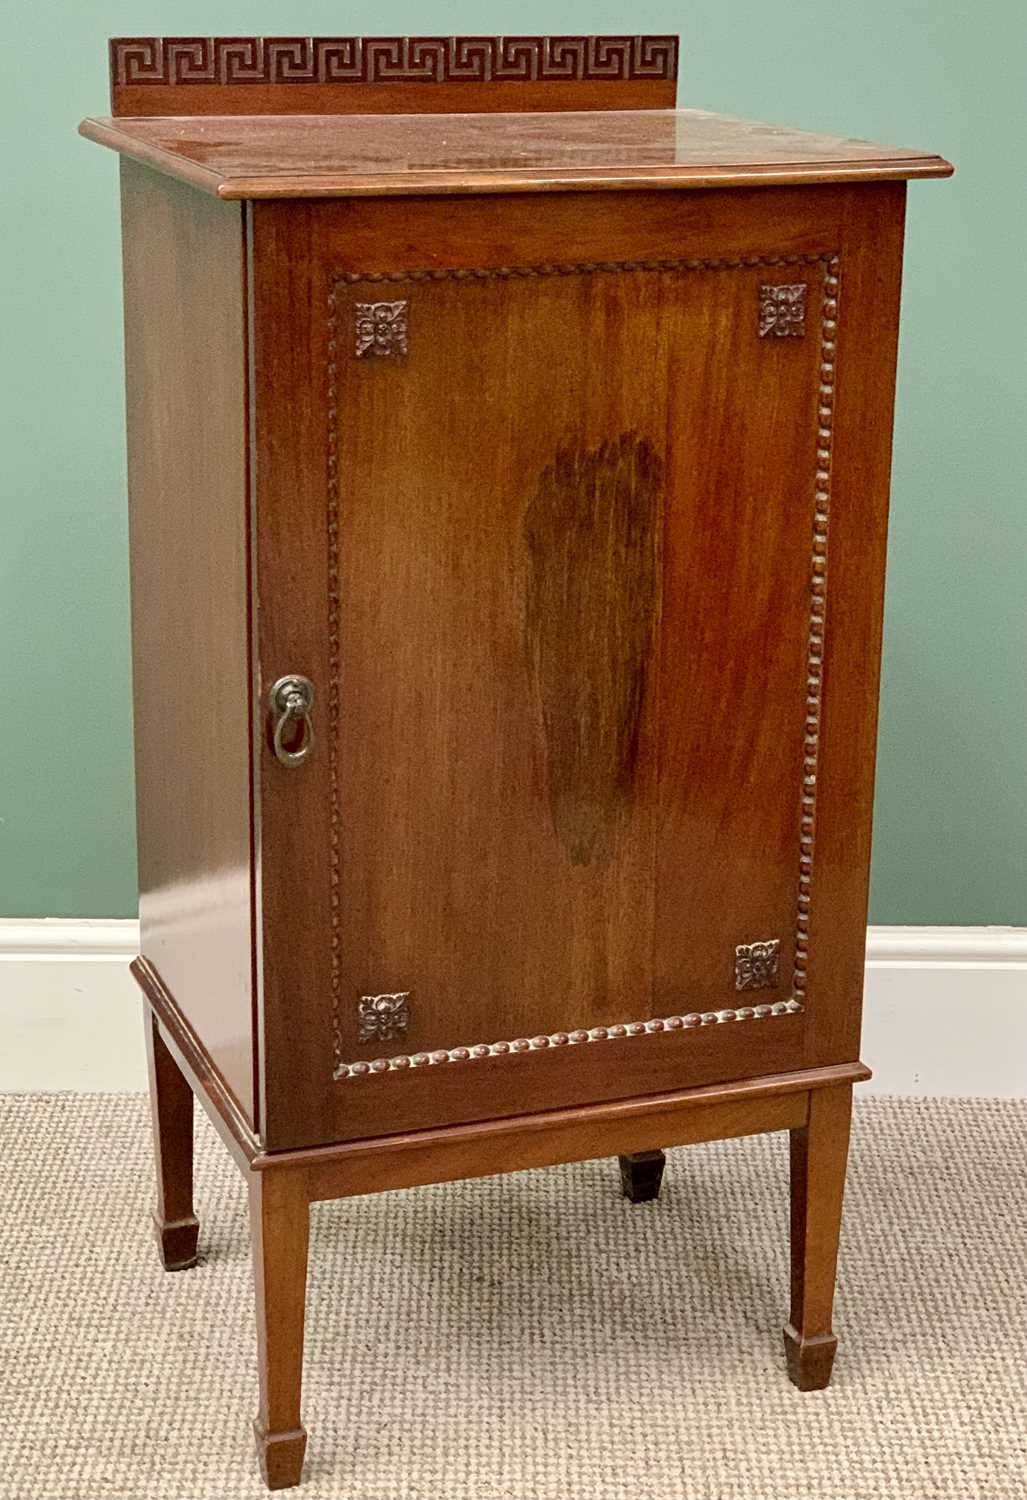 RAY & MILES MAHOGANY SIDE CABINET - having a rail back with Greek Key detail, single panelled door